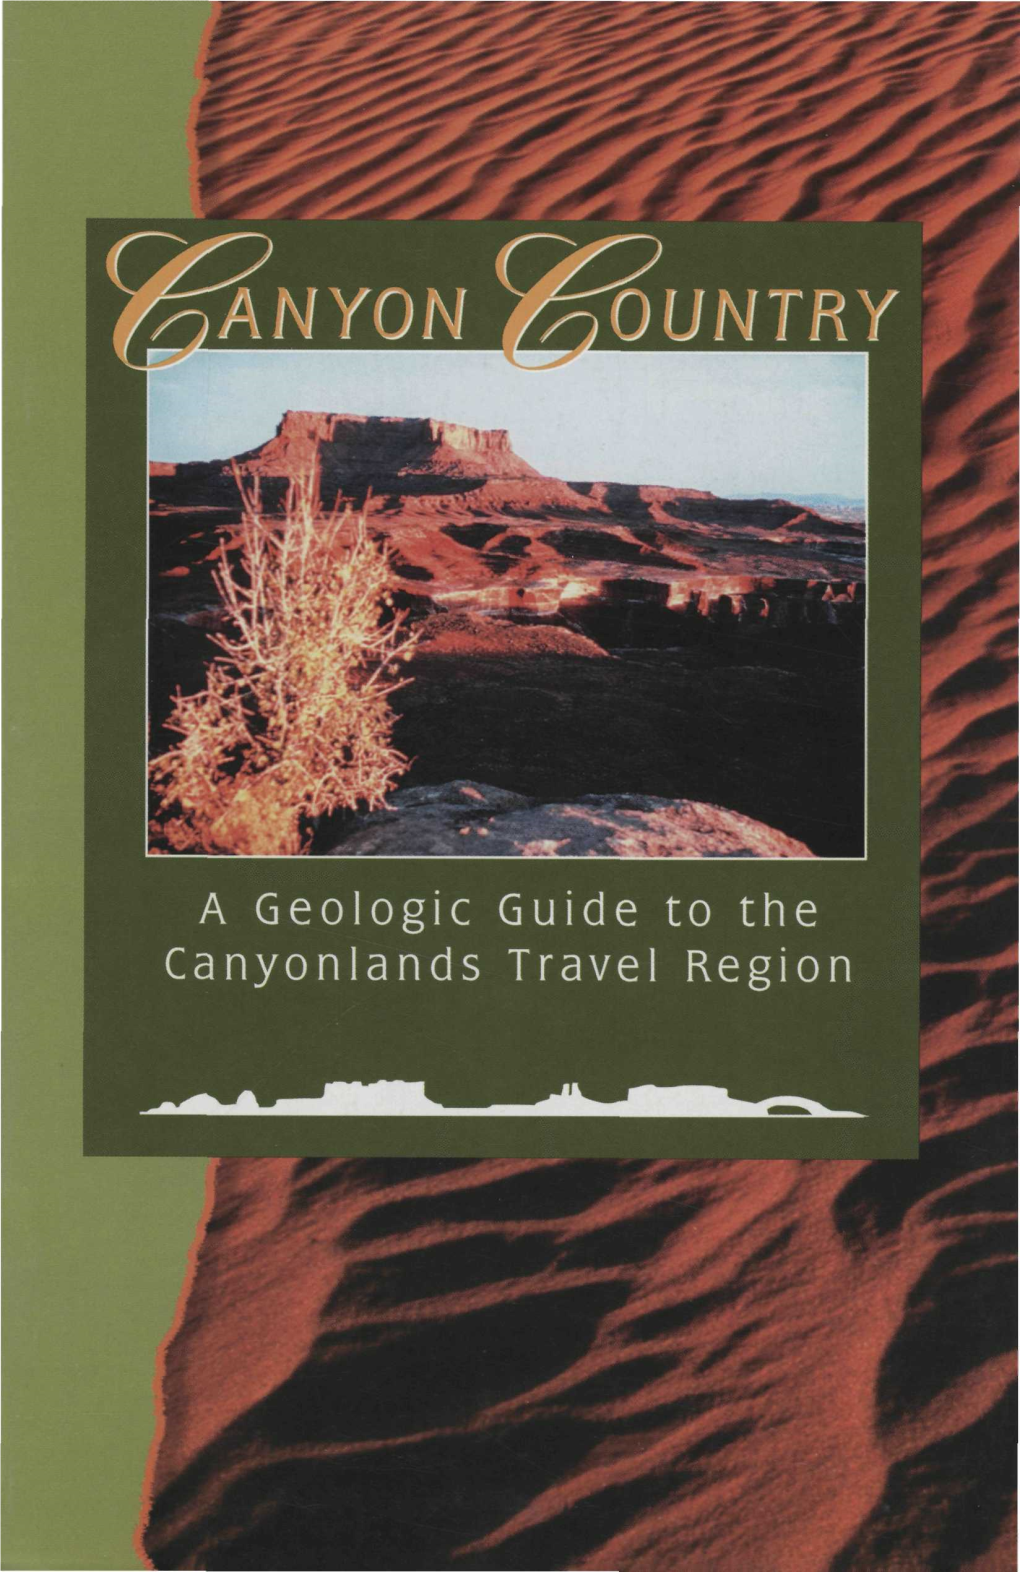 A Geologic Guide to the Canyonlands Travel Region